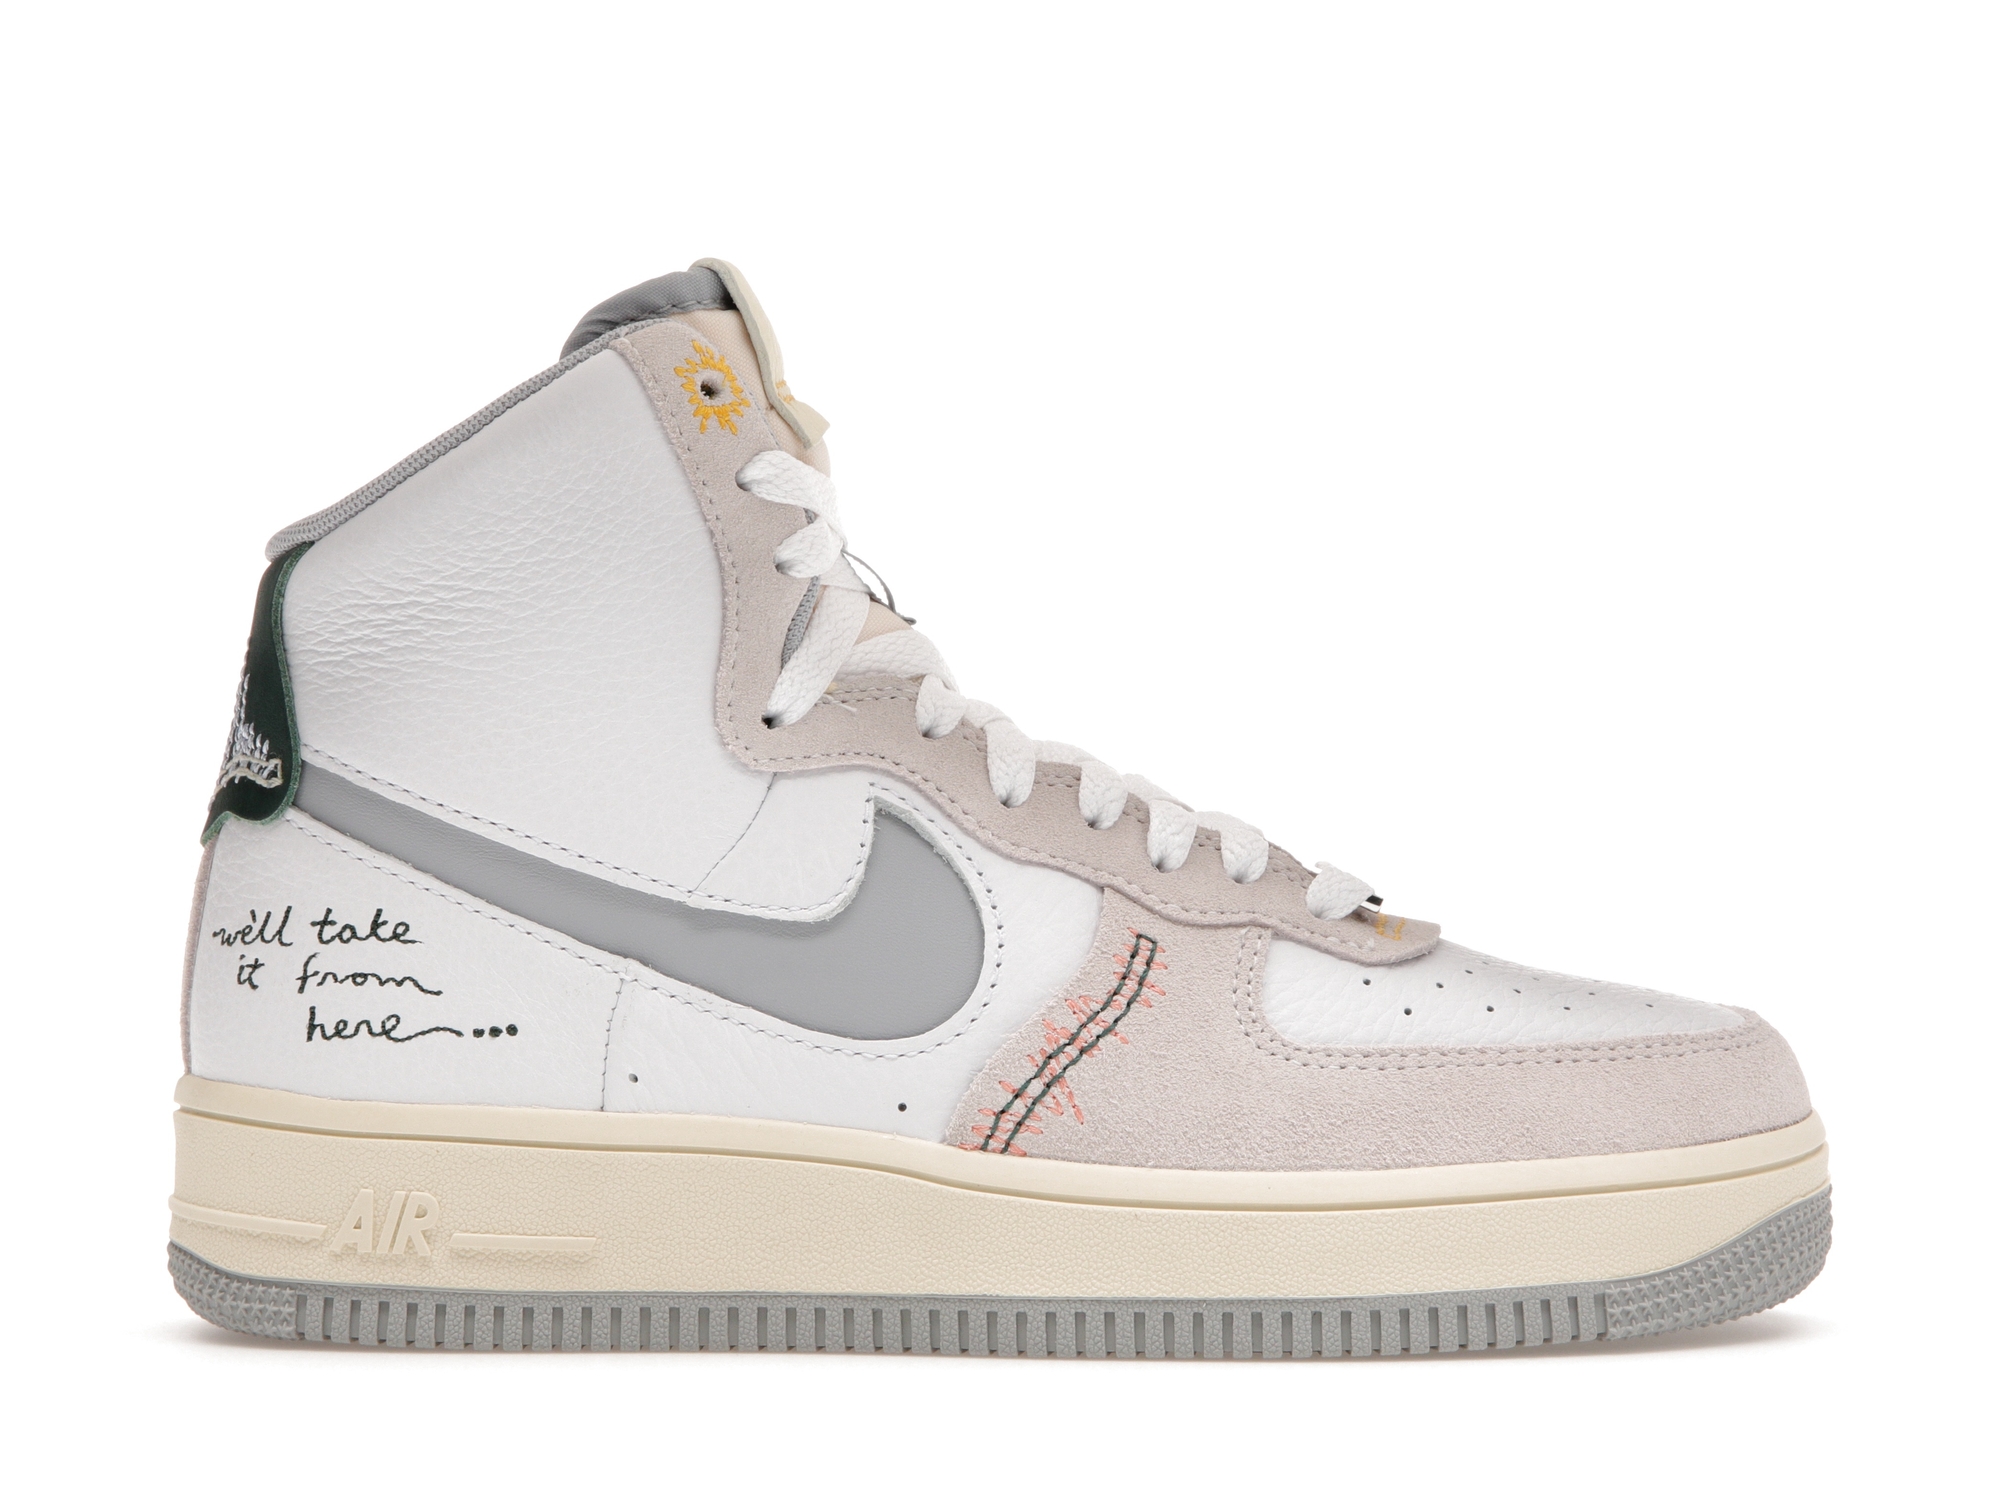 Nike Air Force 1 High Sculpt We'll Take It From Here (Women's